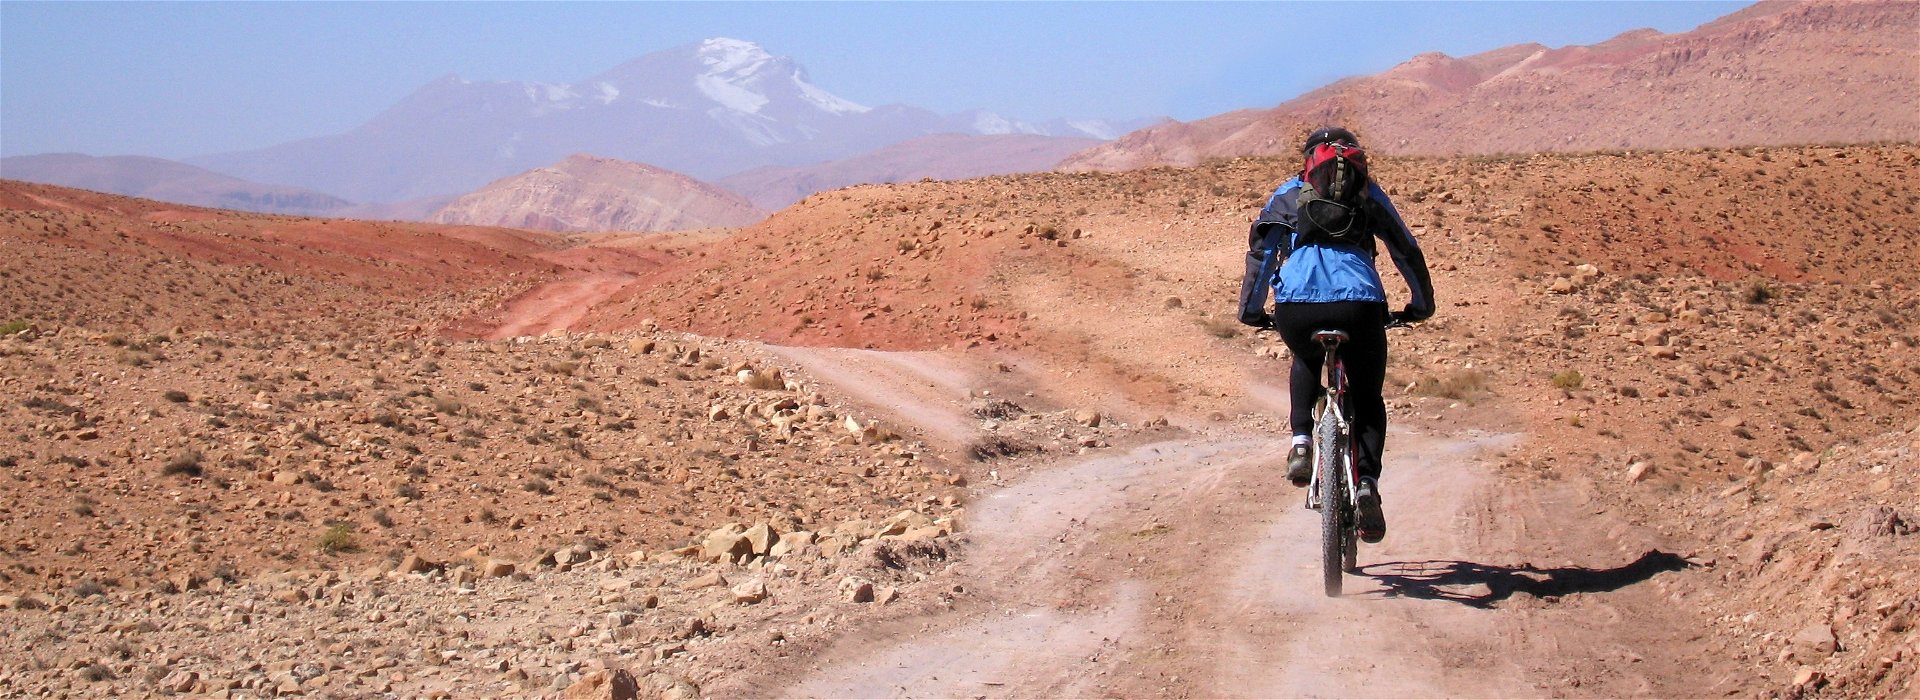 25 years later: a mountain bike journey in Morocco